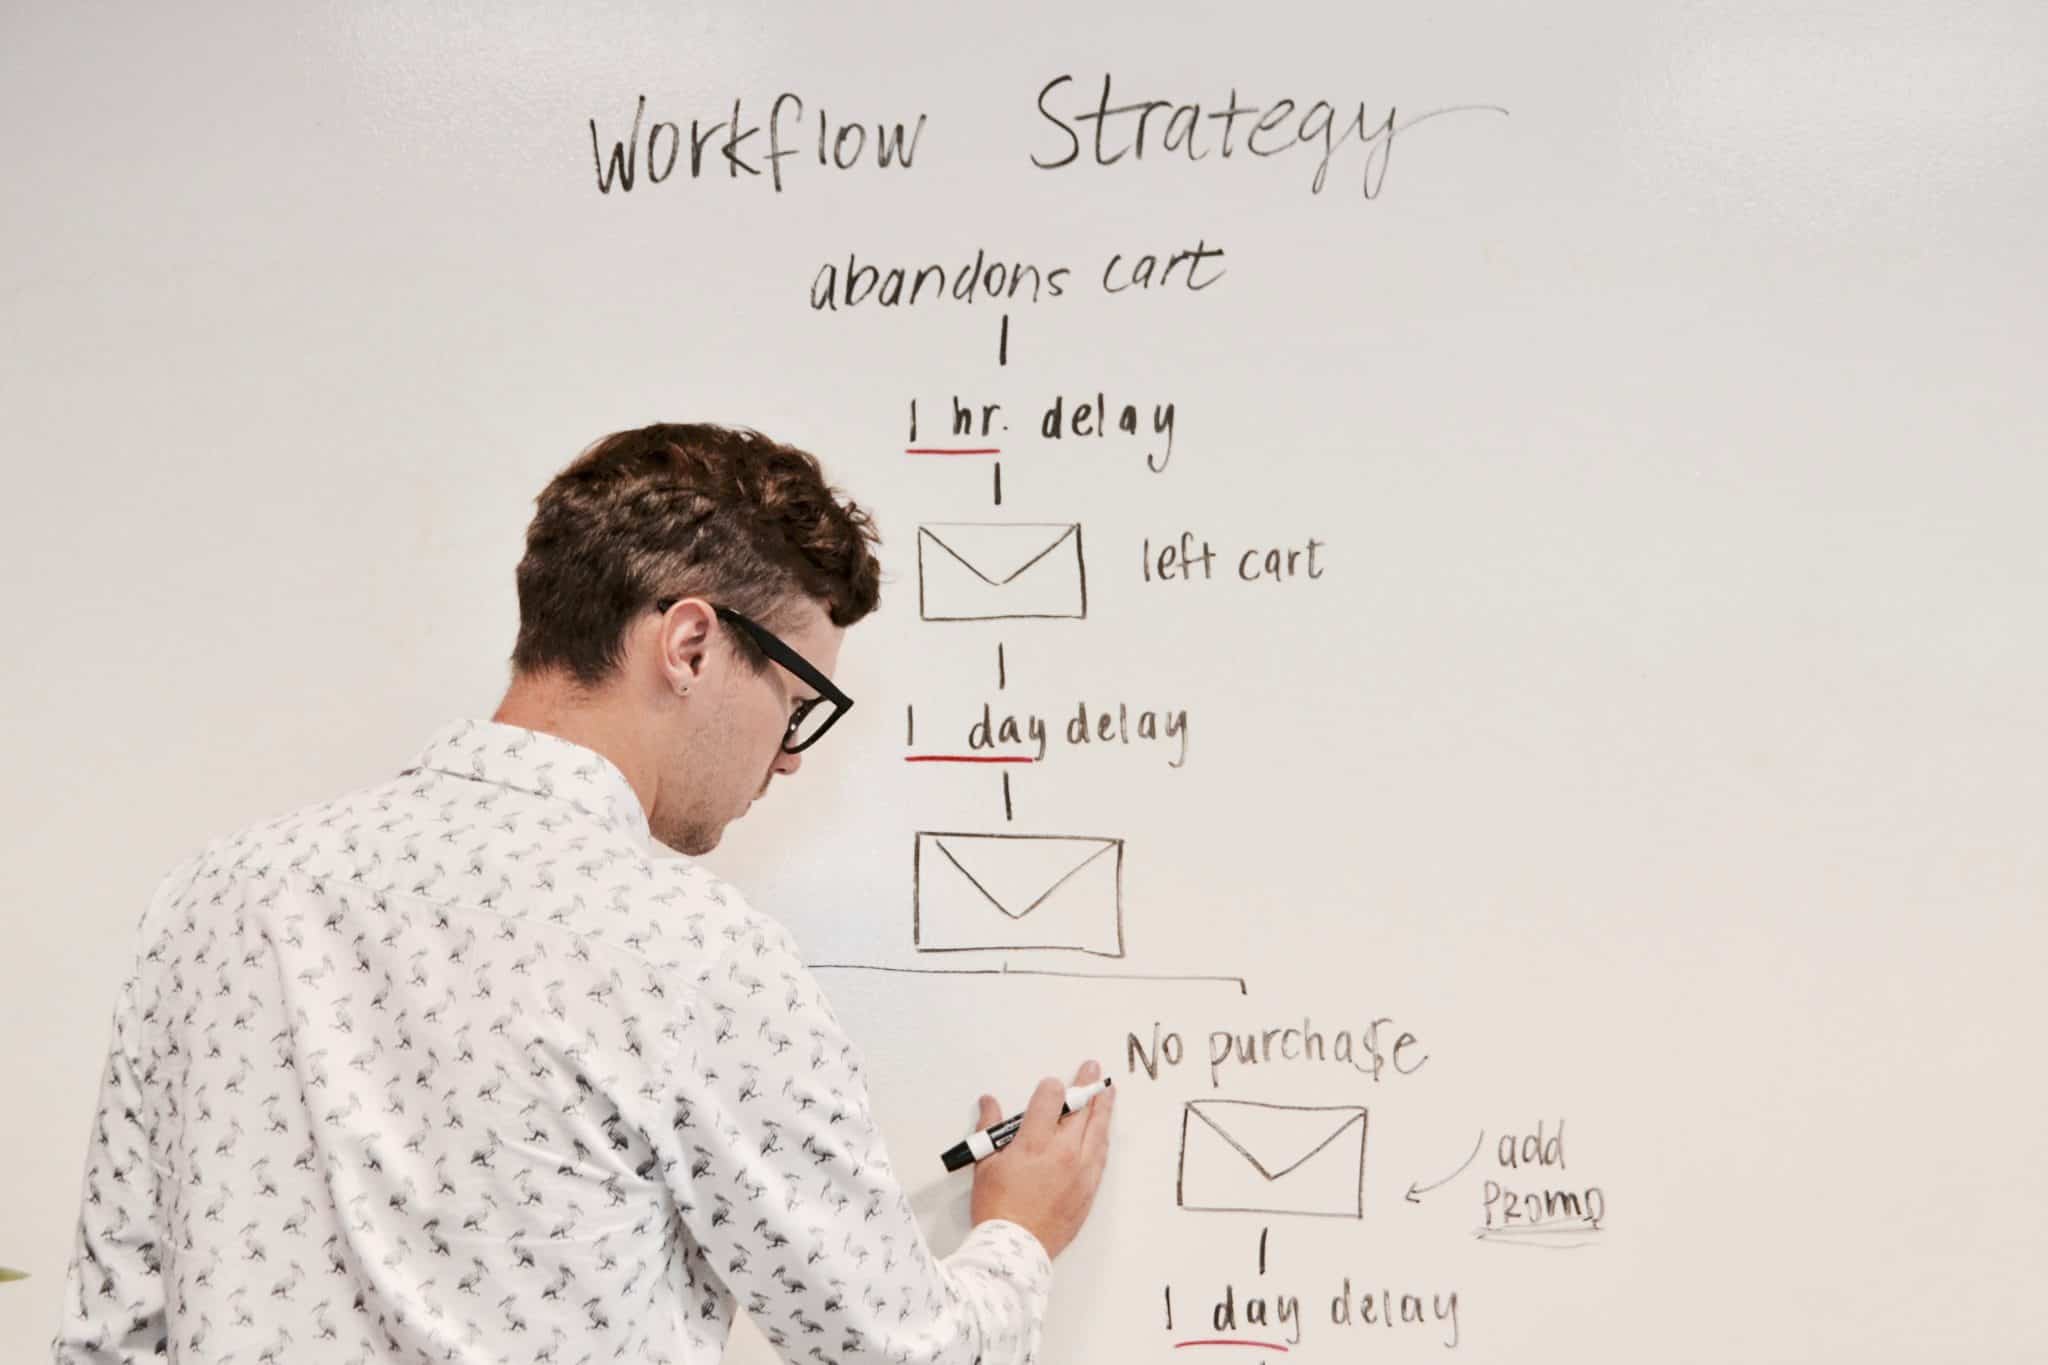 marketing automation - whiteboard with workflow